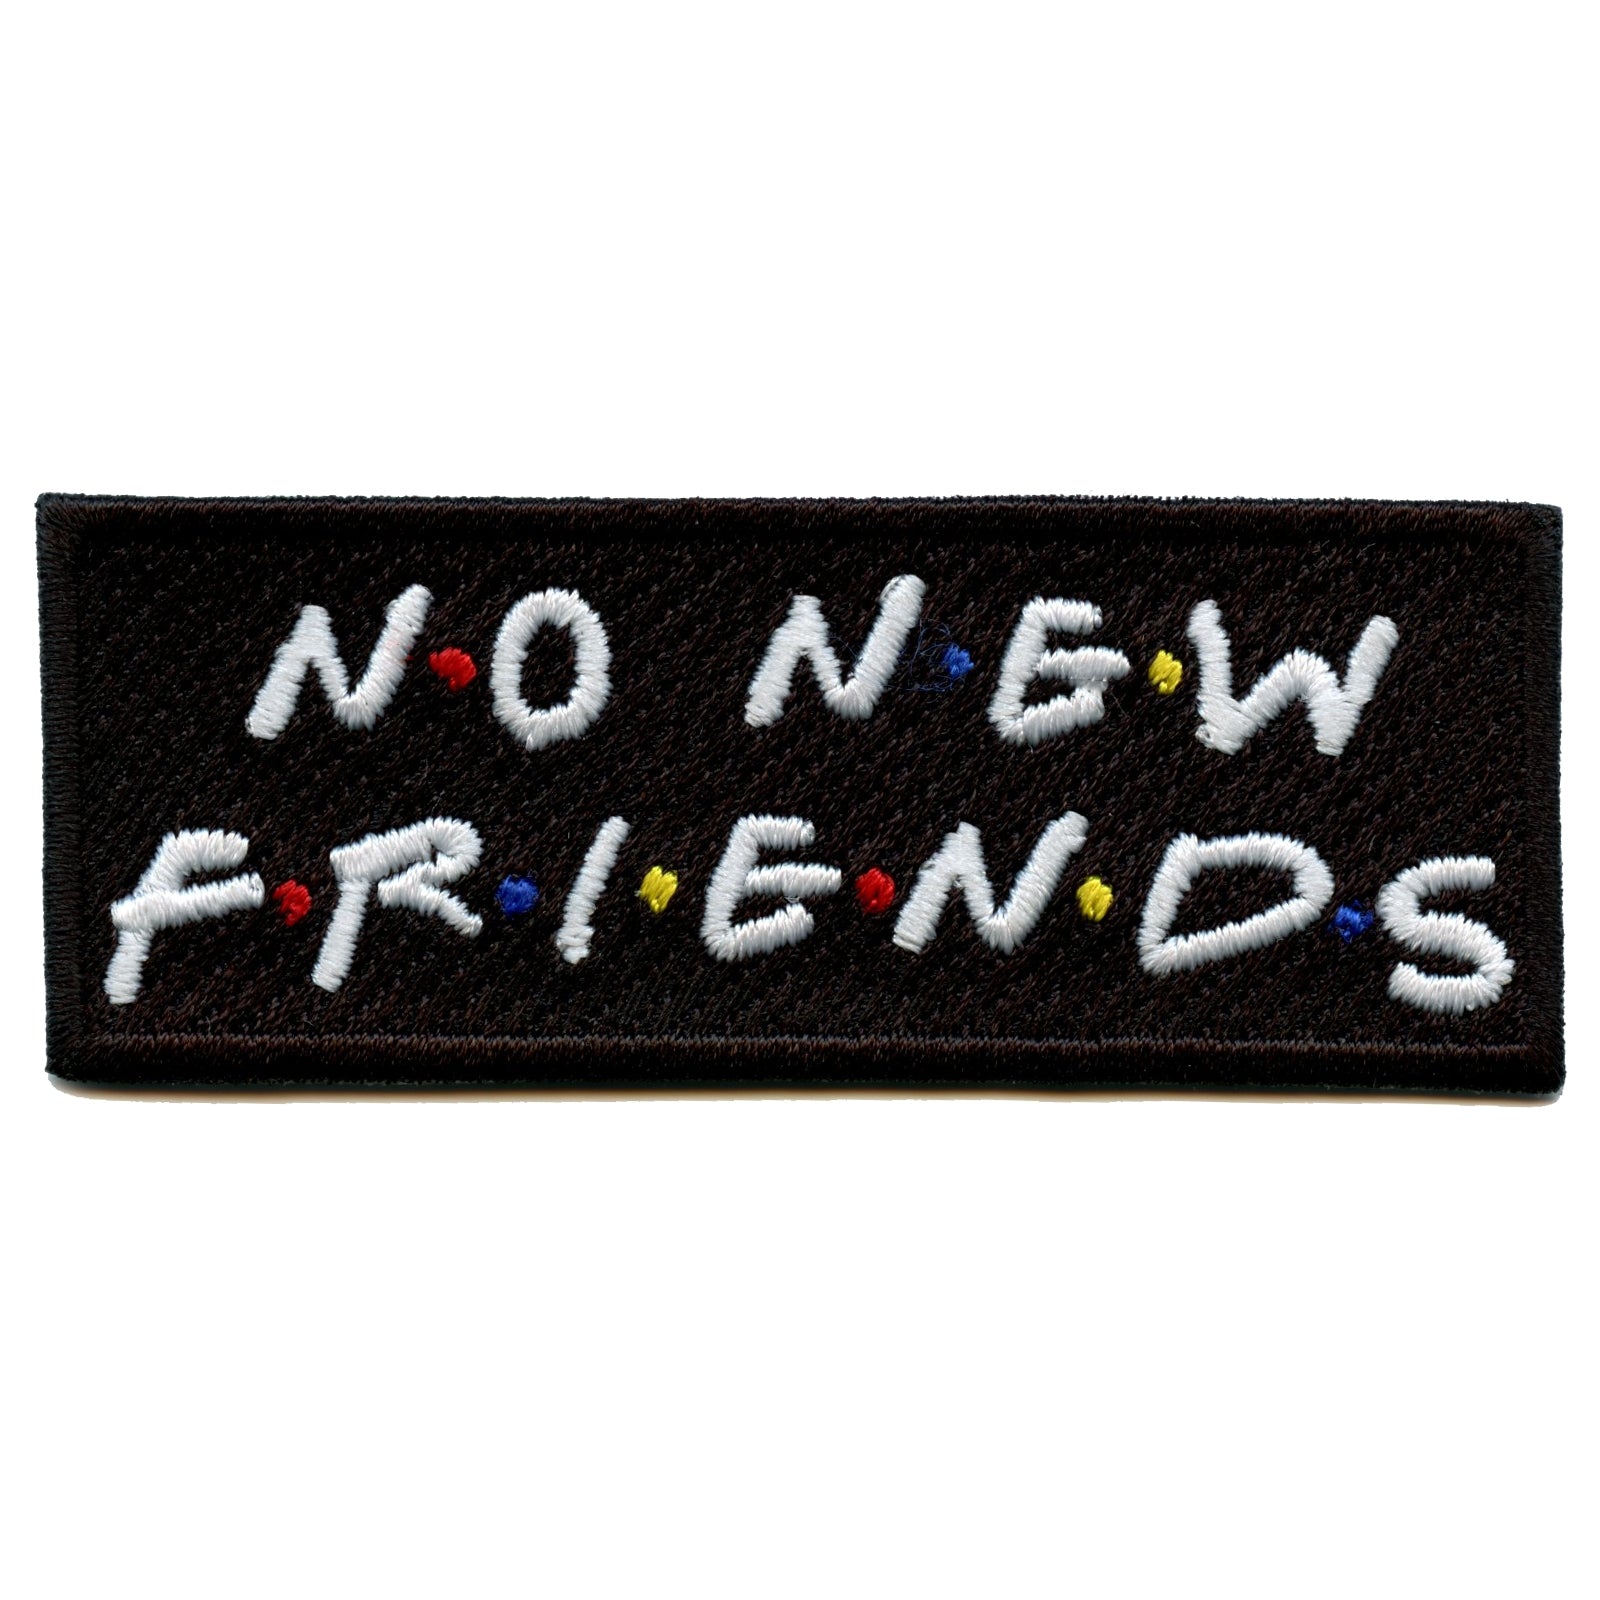 No New Friends Embroidered Iron On Patch 